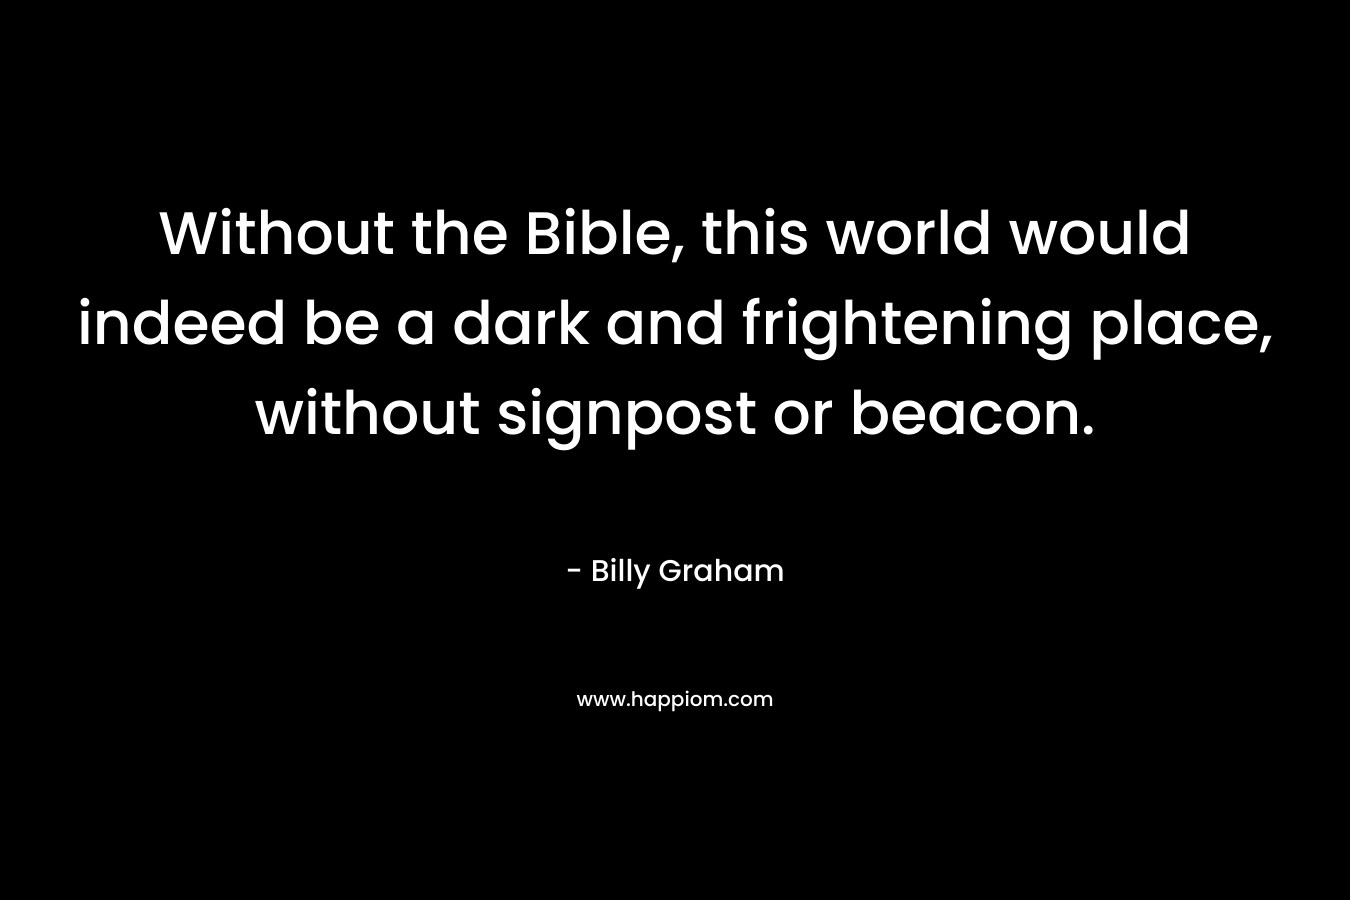 Without the Bible, this world would indeed be a dark and frightening place, without signpost or beacon.